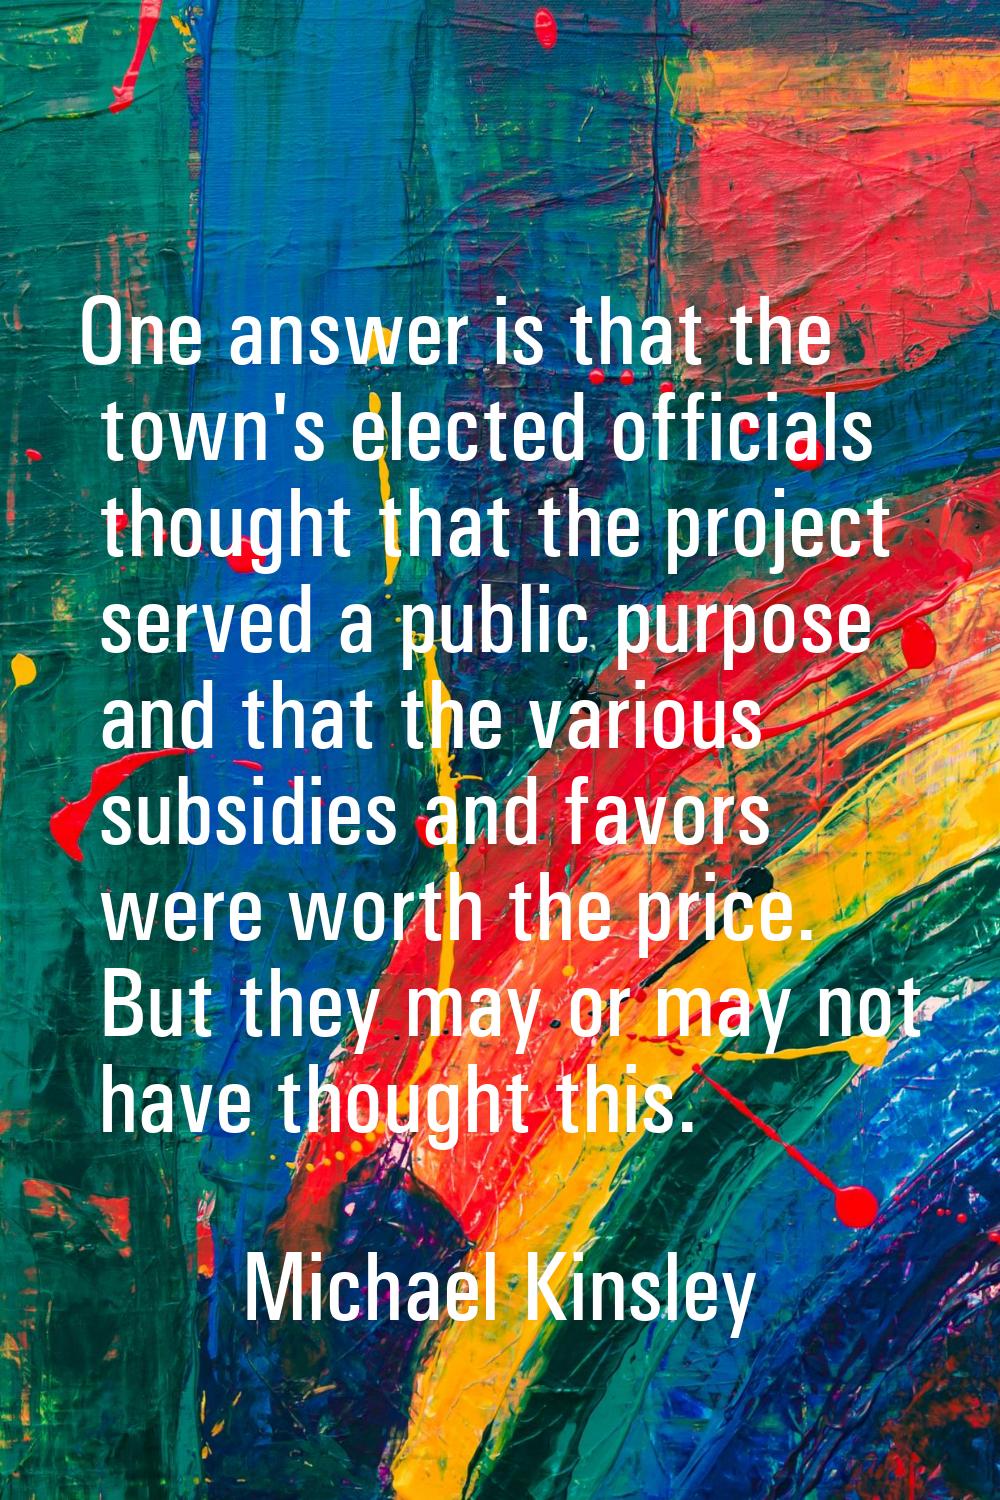 One answer is that the town's elected officials thought that the project served a public purpose an